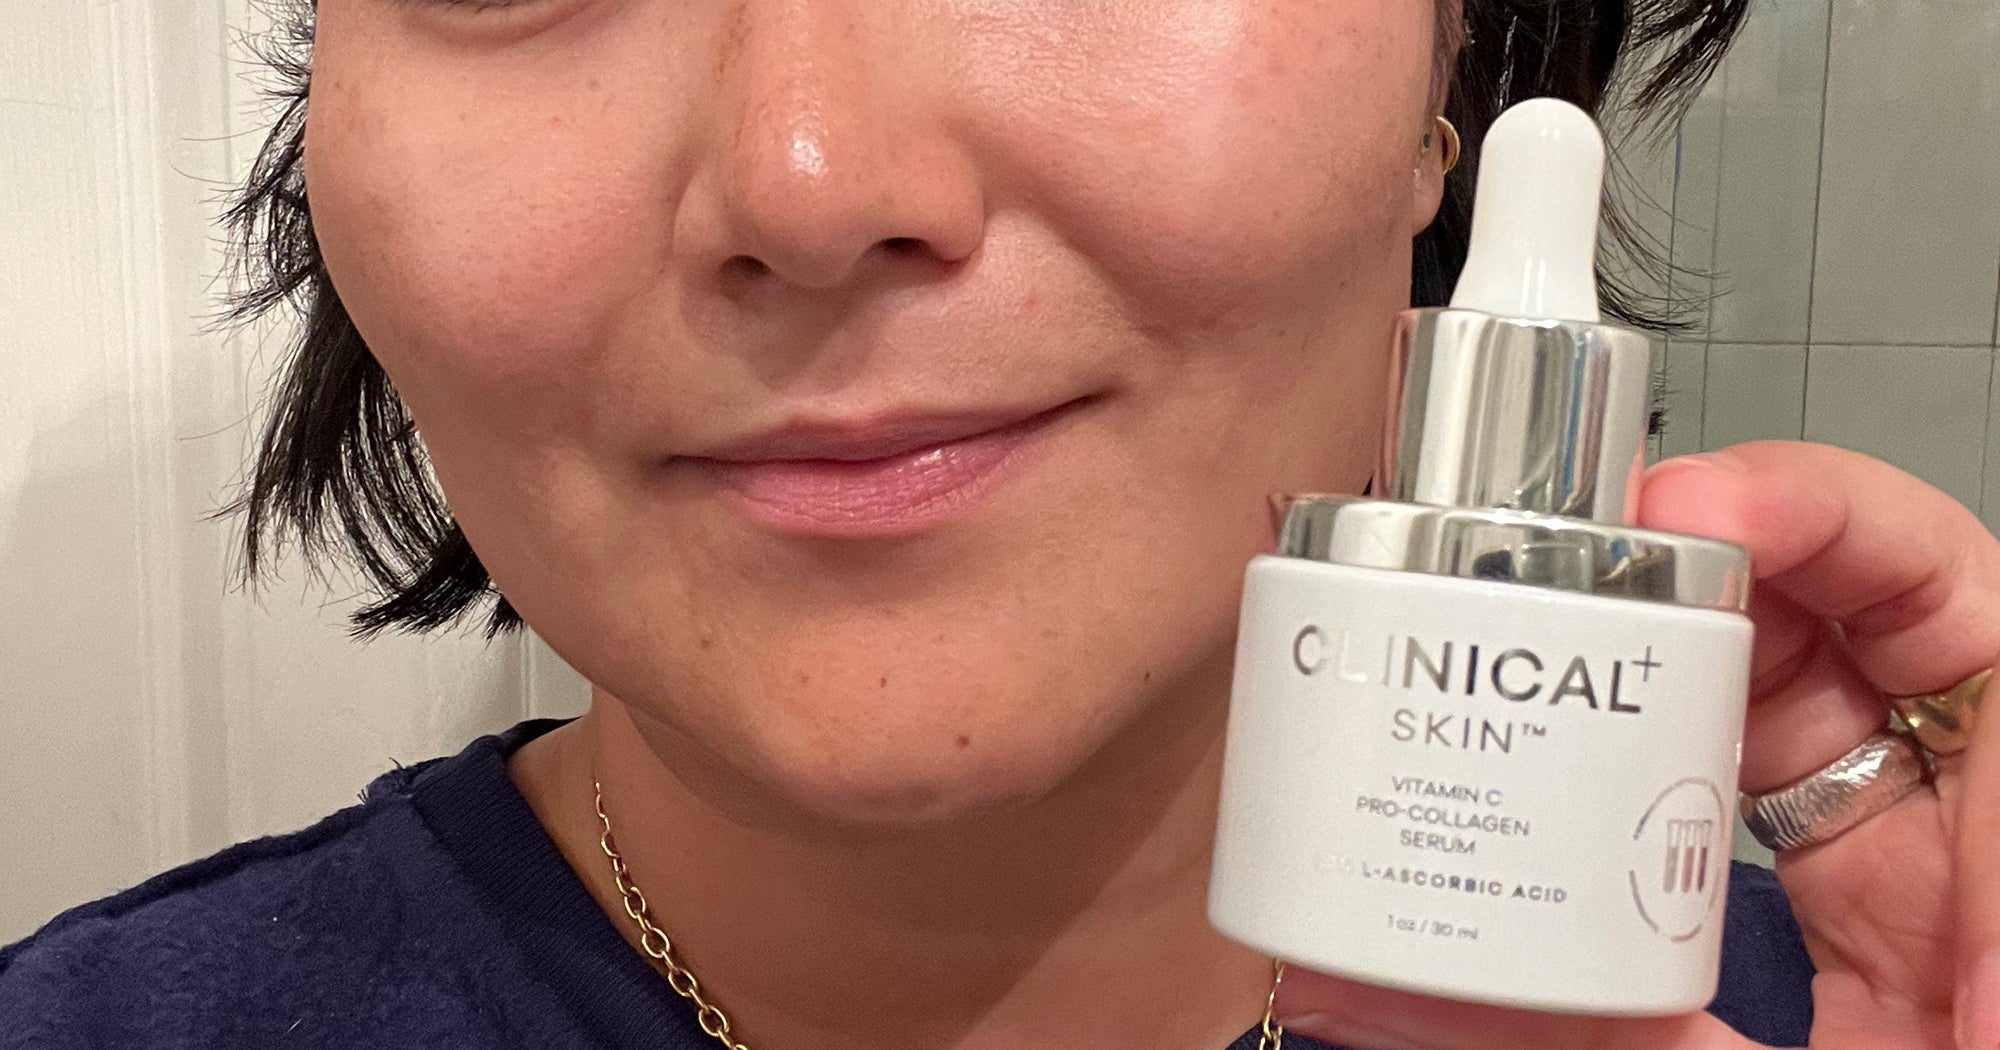 This Vitamin C Serum Is Expensive—But It Actually Works